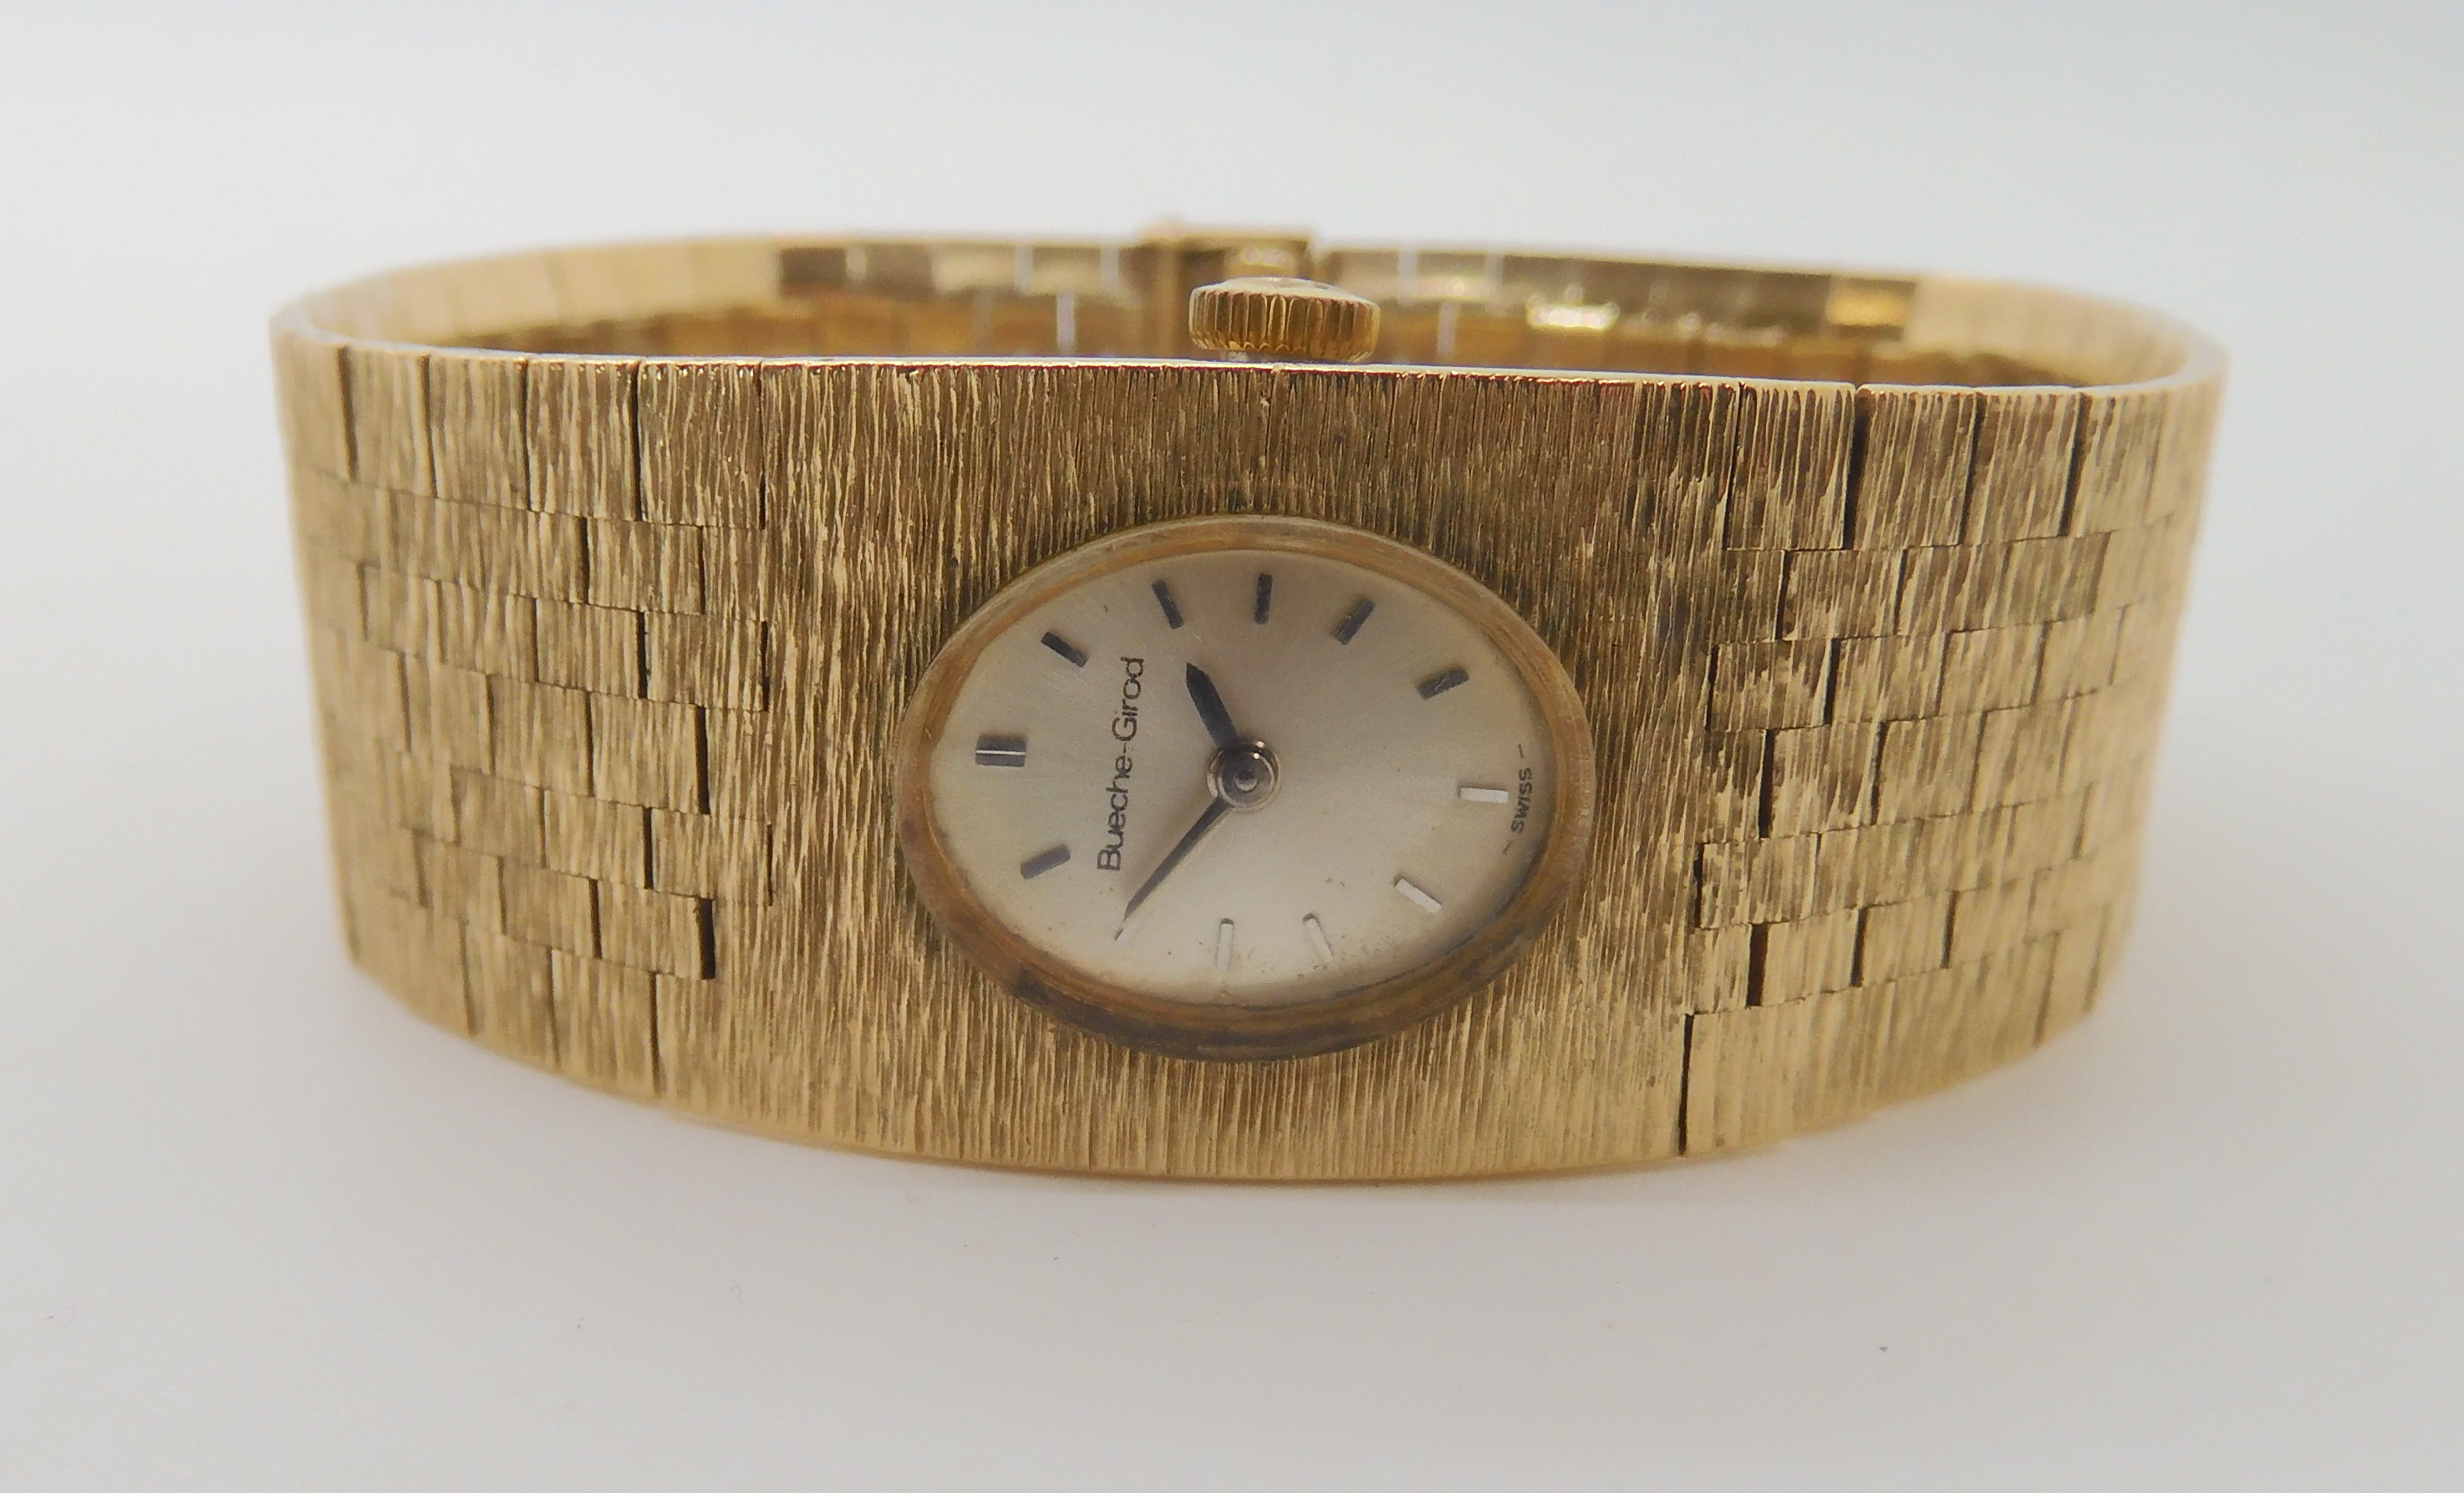 A 9CT GOLD RETRO BUECHE GIROD LADIES WATCH with integral bark textured strap, length 16cm width at